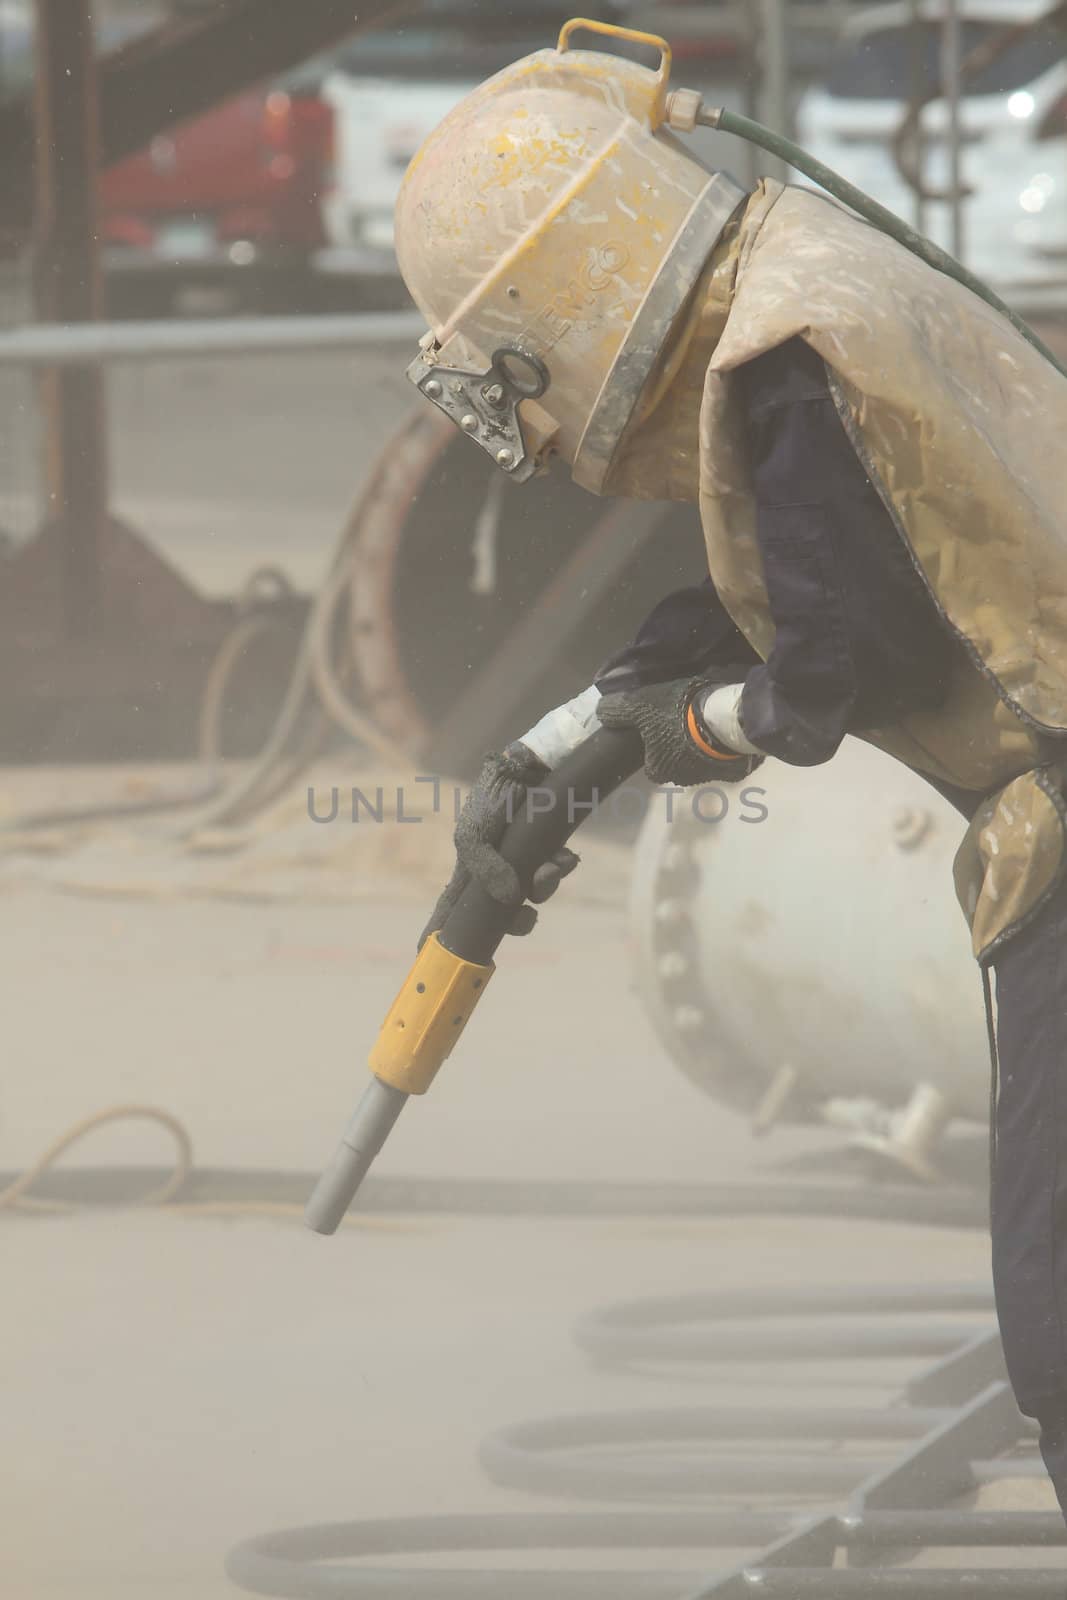 Sandblasting of metal structures at construction site by rufous